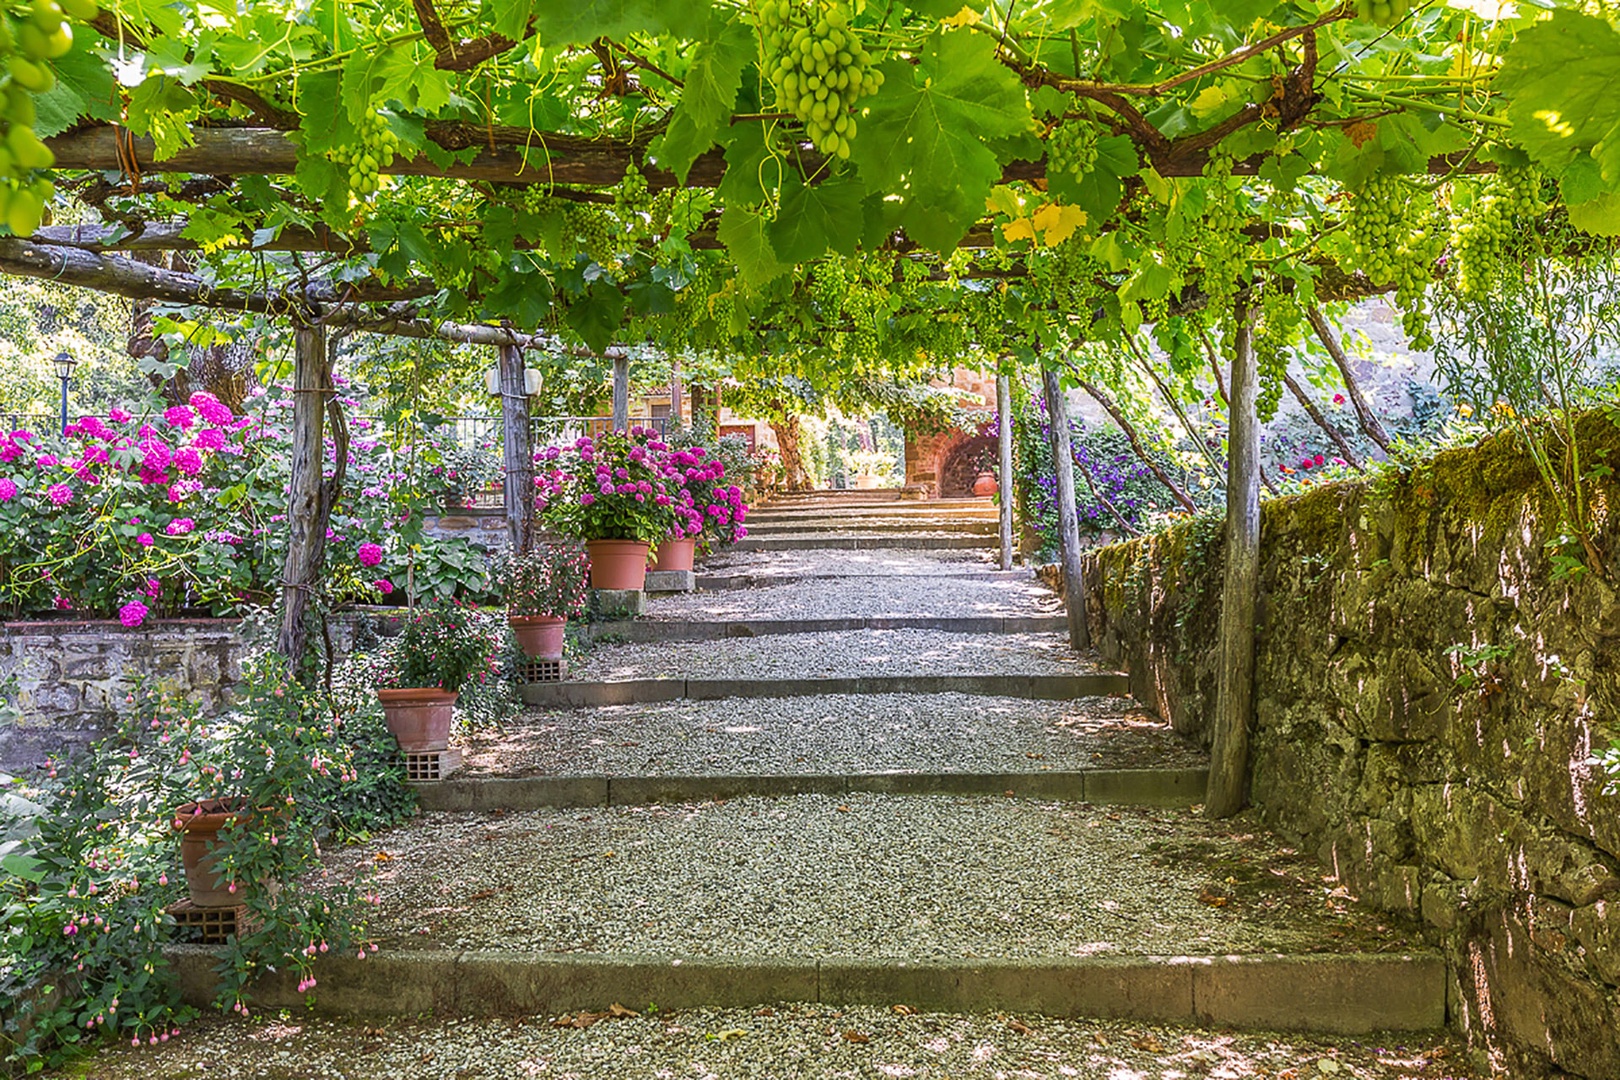 Grapevine covered pergola beckons you down a gravel path to the swimming pool and outdoor Jacuzzi.